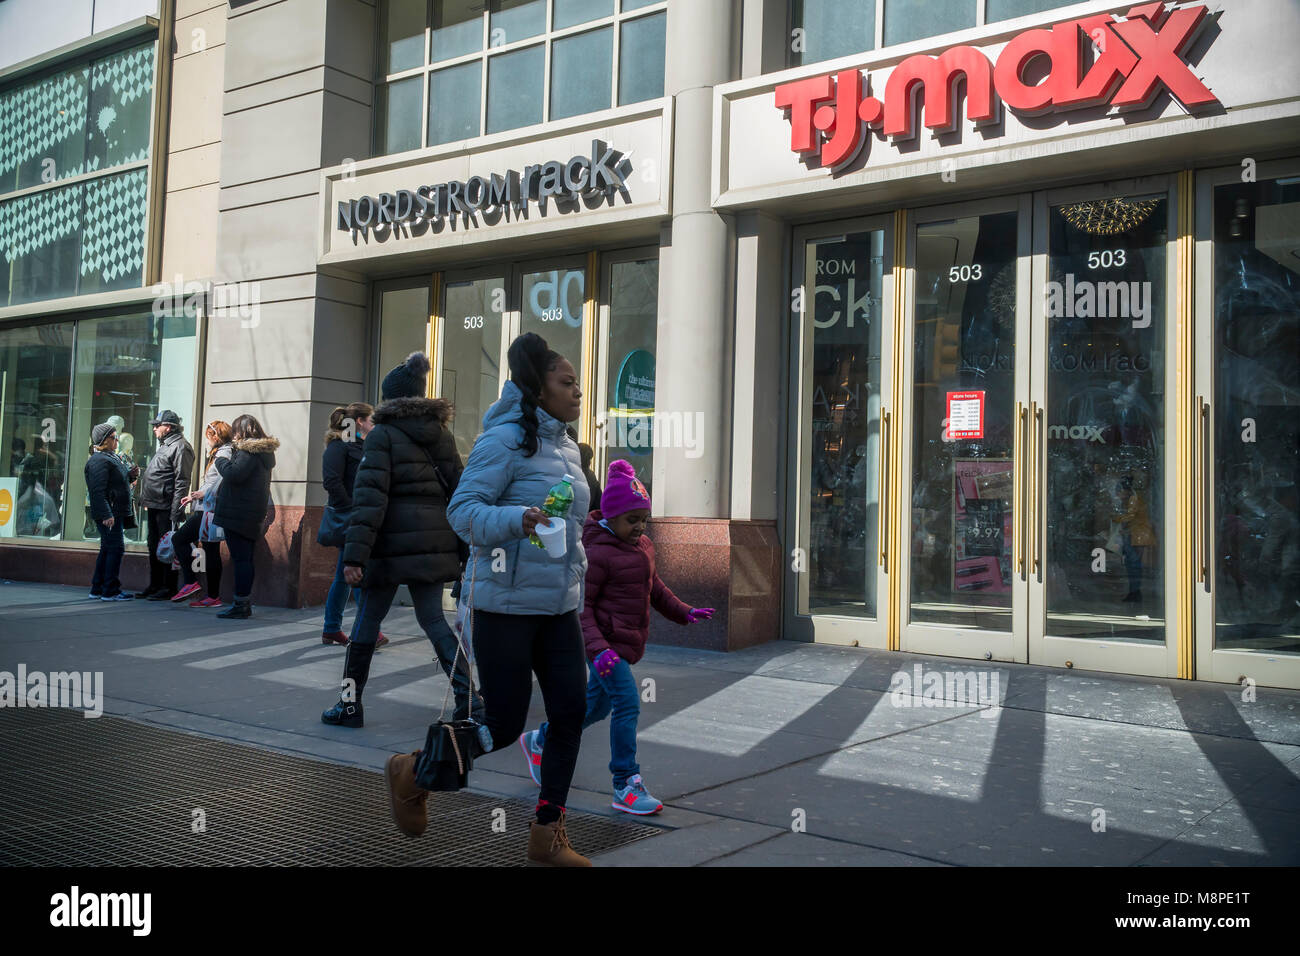 Off-price retailers Nordstrom Rack and TJ Maxx share space in a building in Downtown Brooklyn in New York on Sunday, March 18, 2018, 2018. The area has been for years a middle and lower economic shopping strip but because of increased development in the area, notably hi-rise luxury apartment buildings, chain stores and high-end retailers are moving in. Rents are rising and the smaller mom and pop stores, as well as regional chains are being forced out.  (Â© Richard B. Levine) Stock Photo